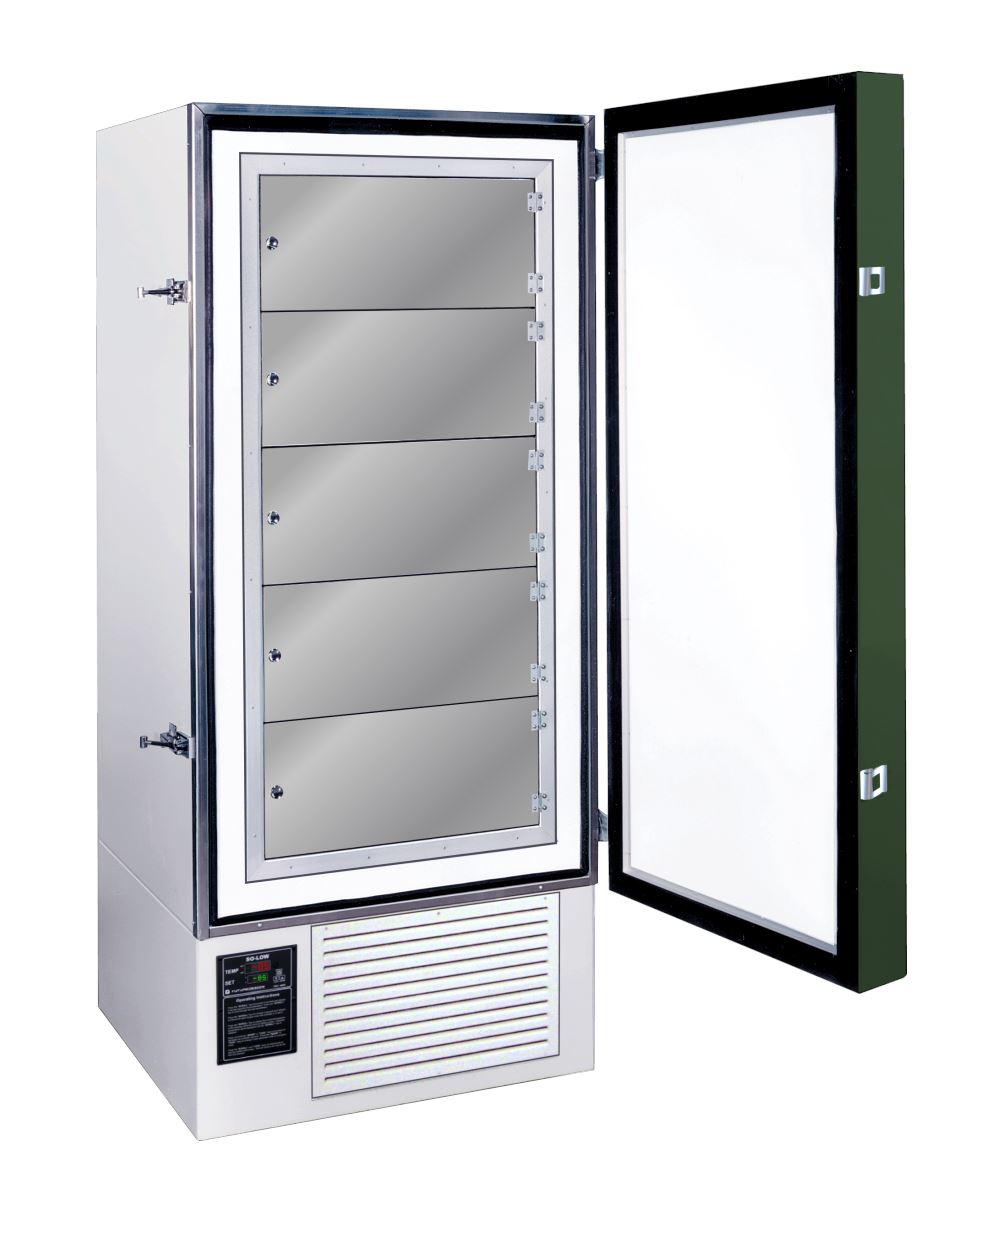 So-Low -85°C Ultra-Low Upright Freezer - 13 Cubic Ft. Shop All Categories So-Low 